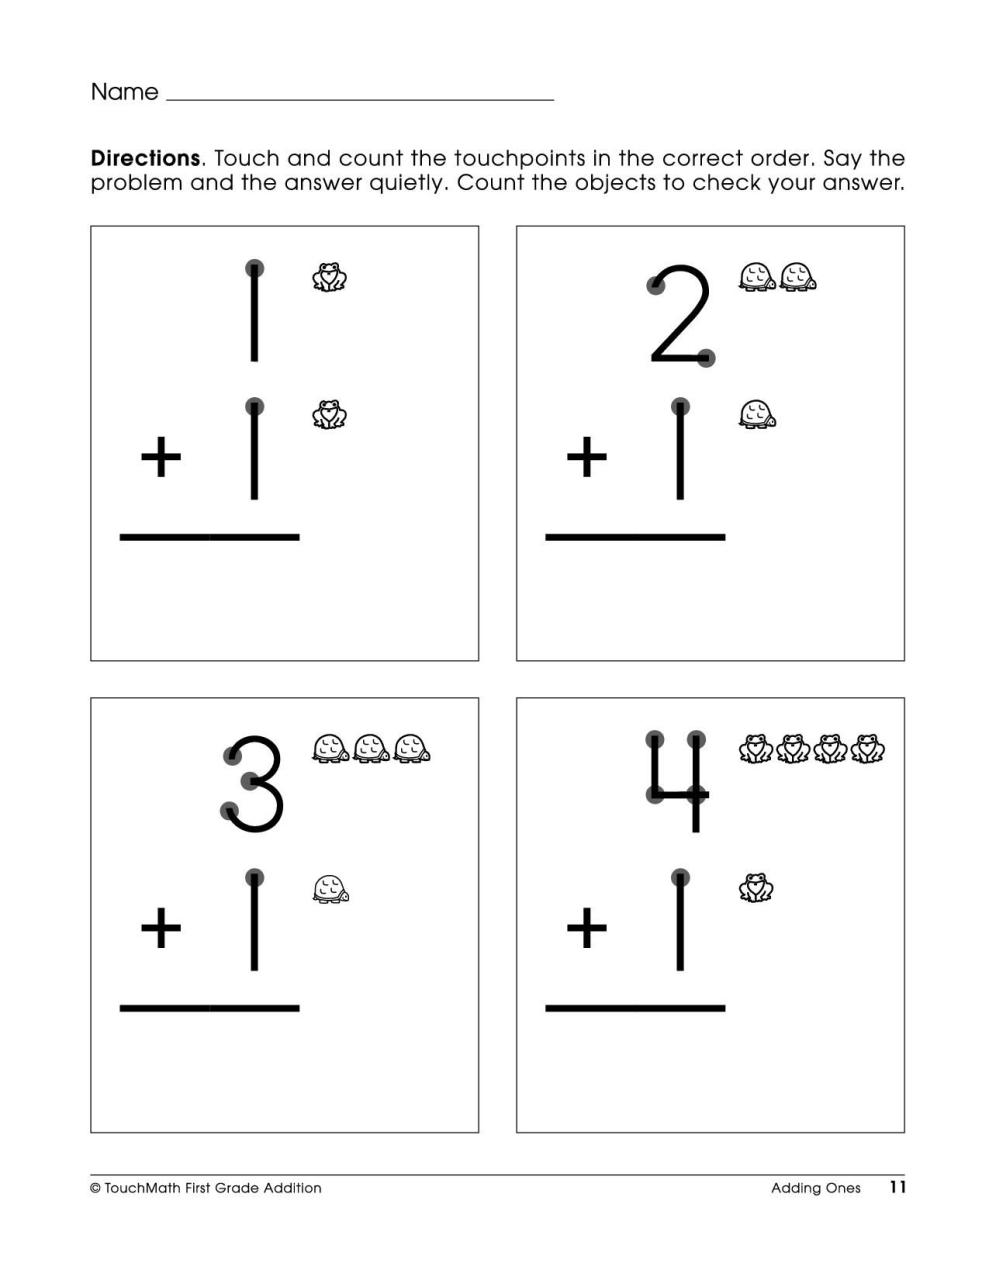 Addition Worksheets With Pictures